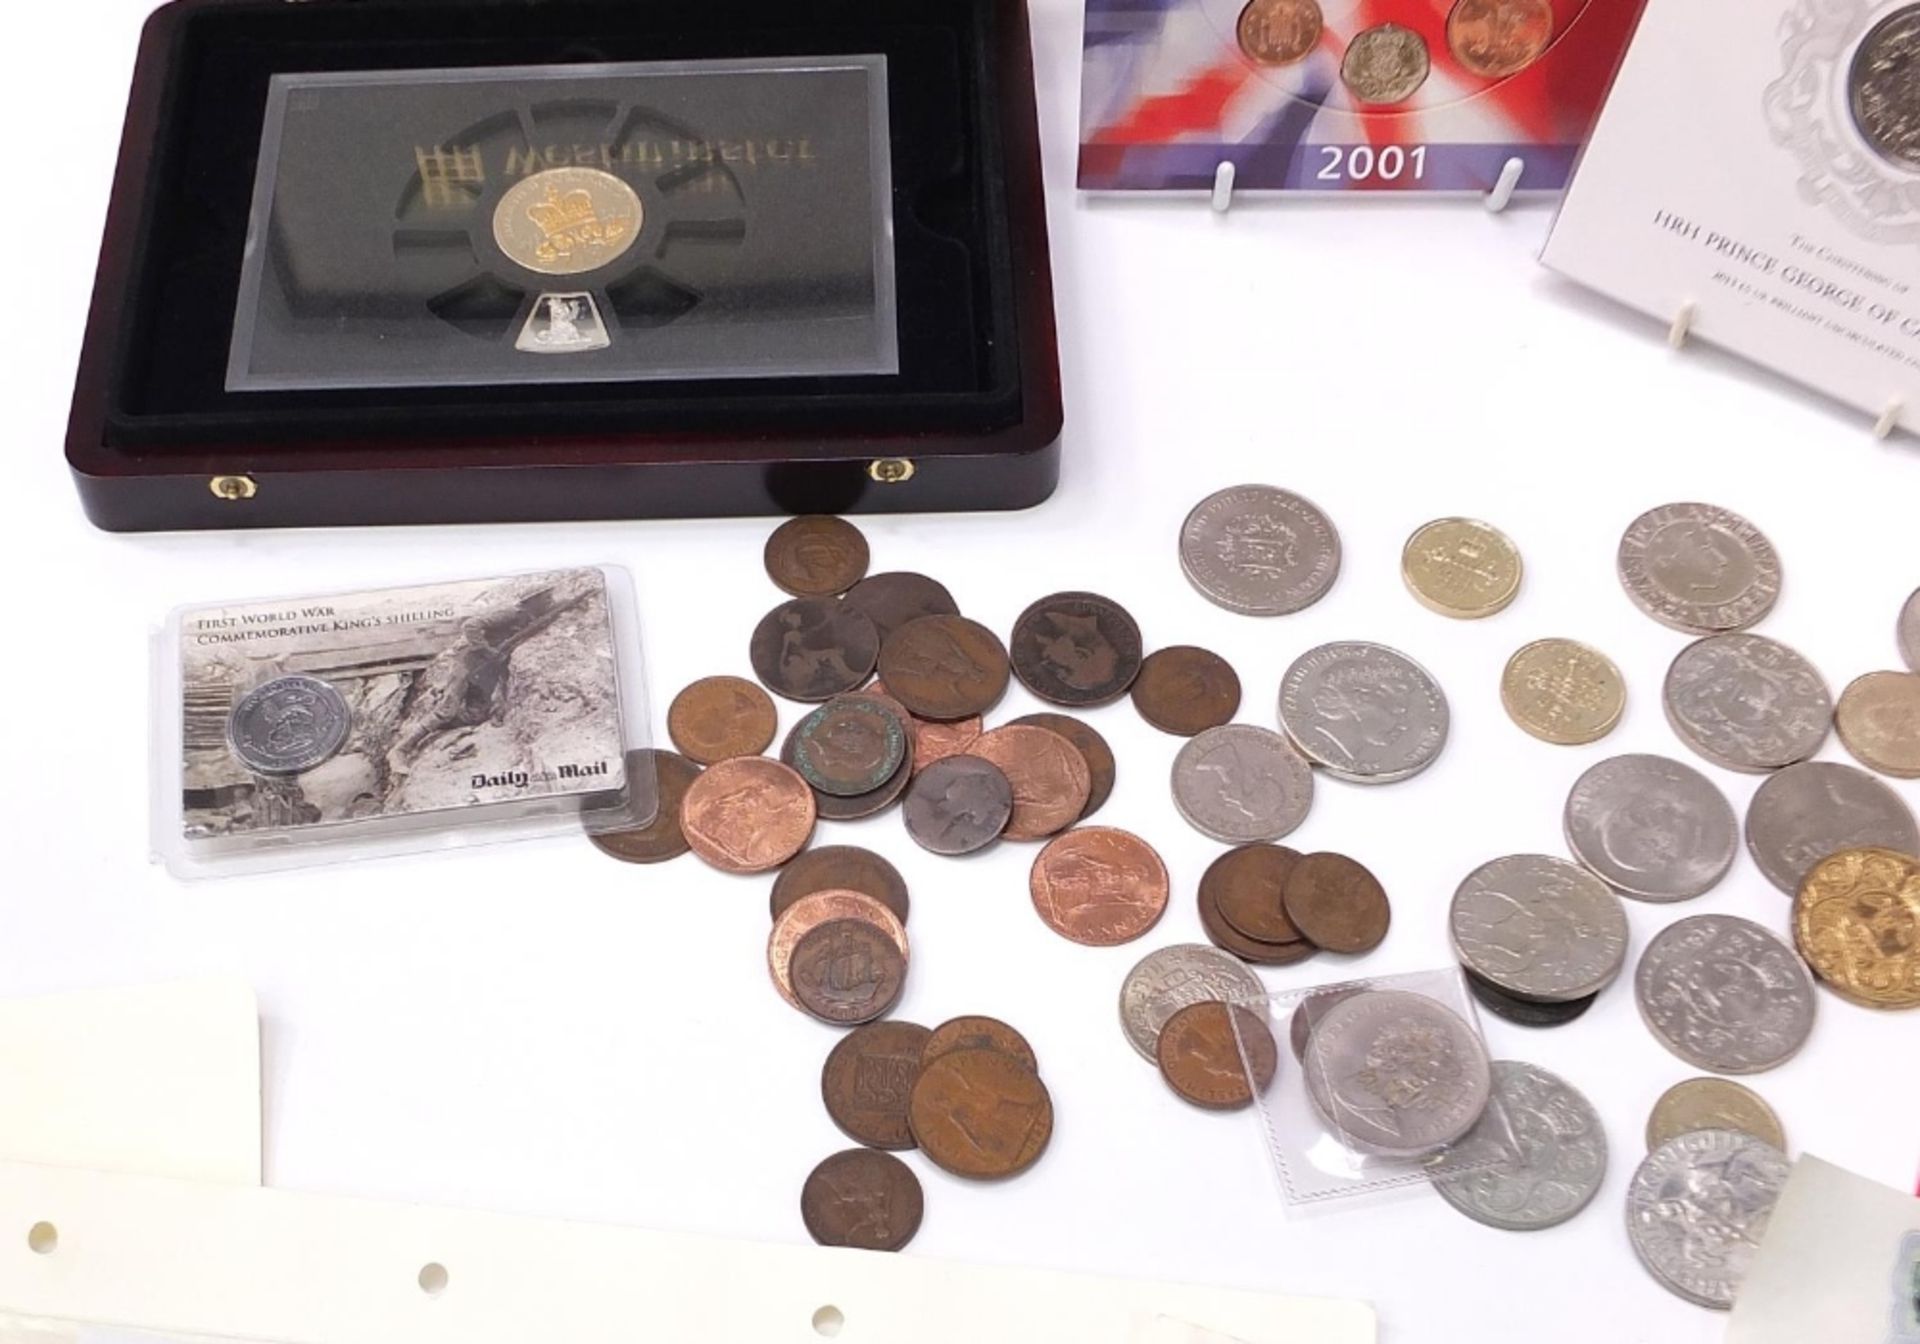 British commemorative coinage, some proof, including five pound coins, two pound coins, - Image 7 of 9